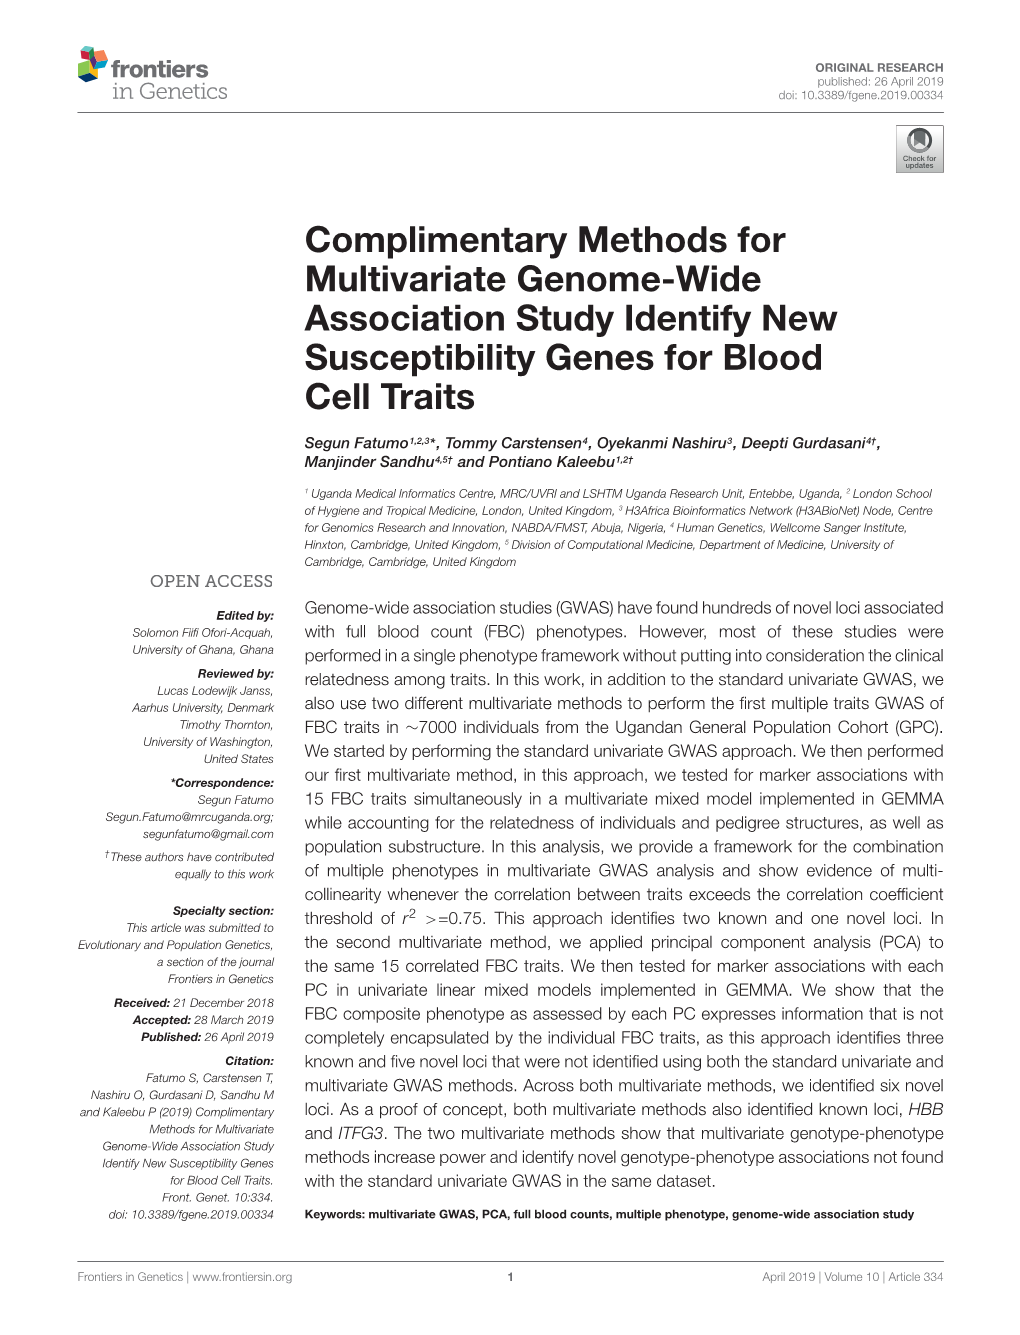 Complimentary Methods for Multivariate Genome-Wide Association Study Identify New Susceptibility Genes for Blood Cell Traits